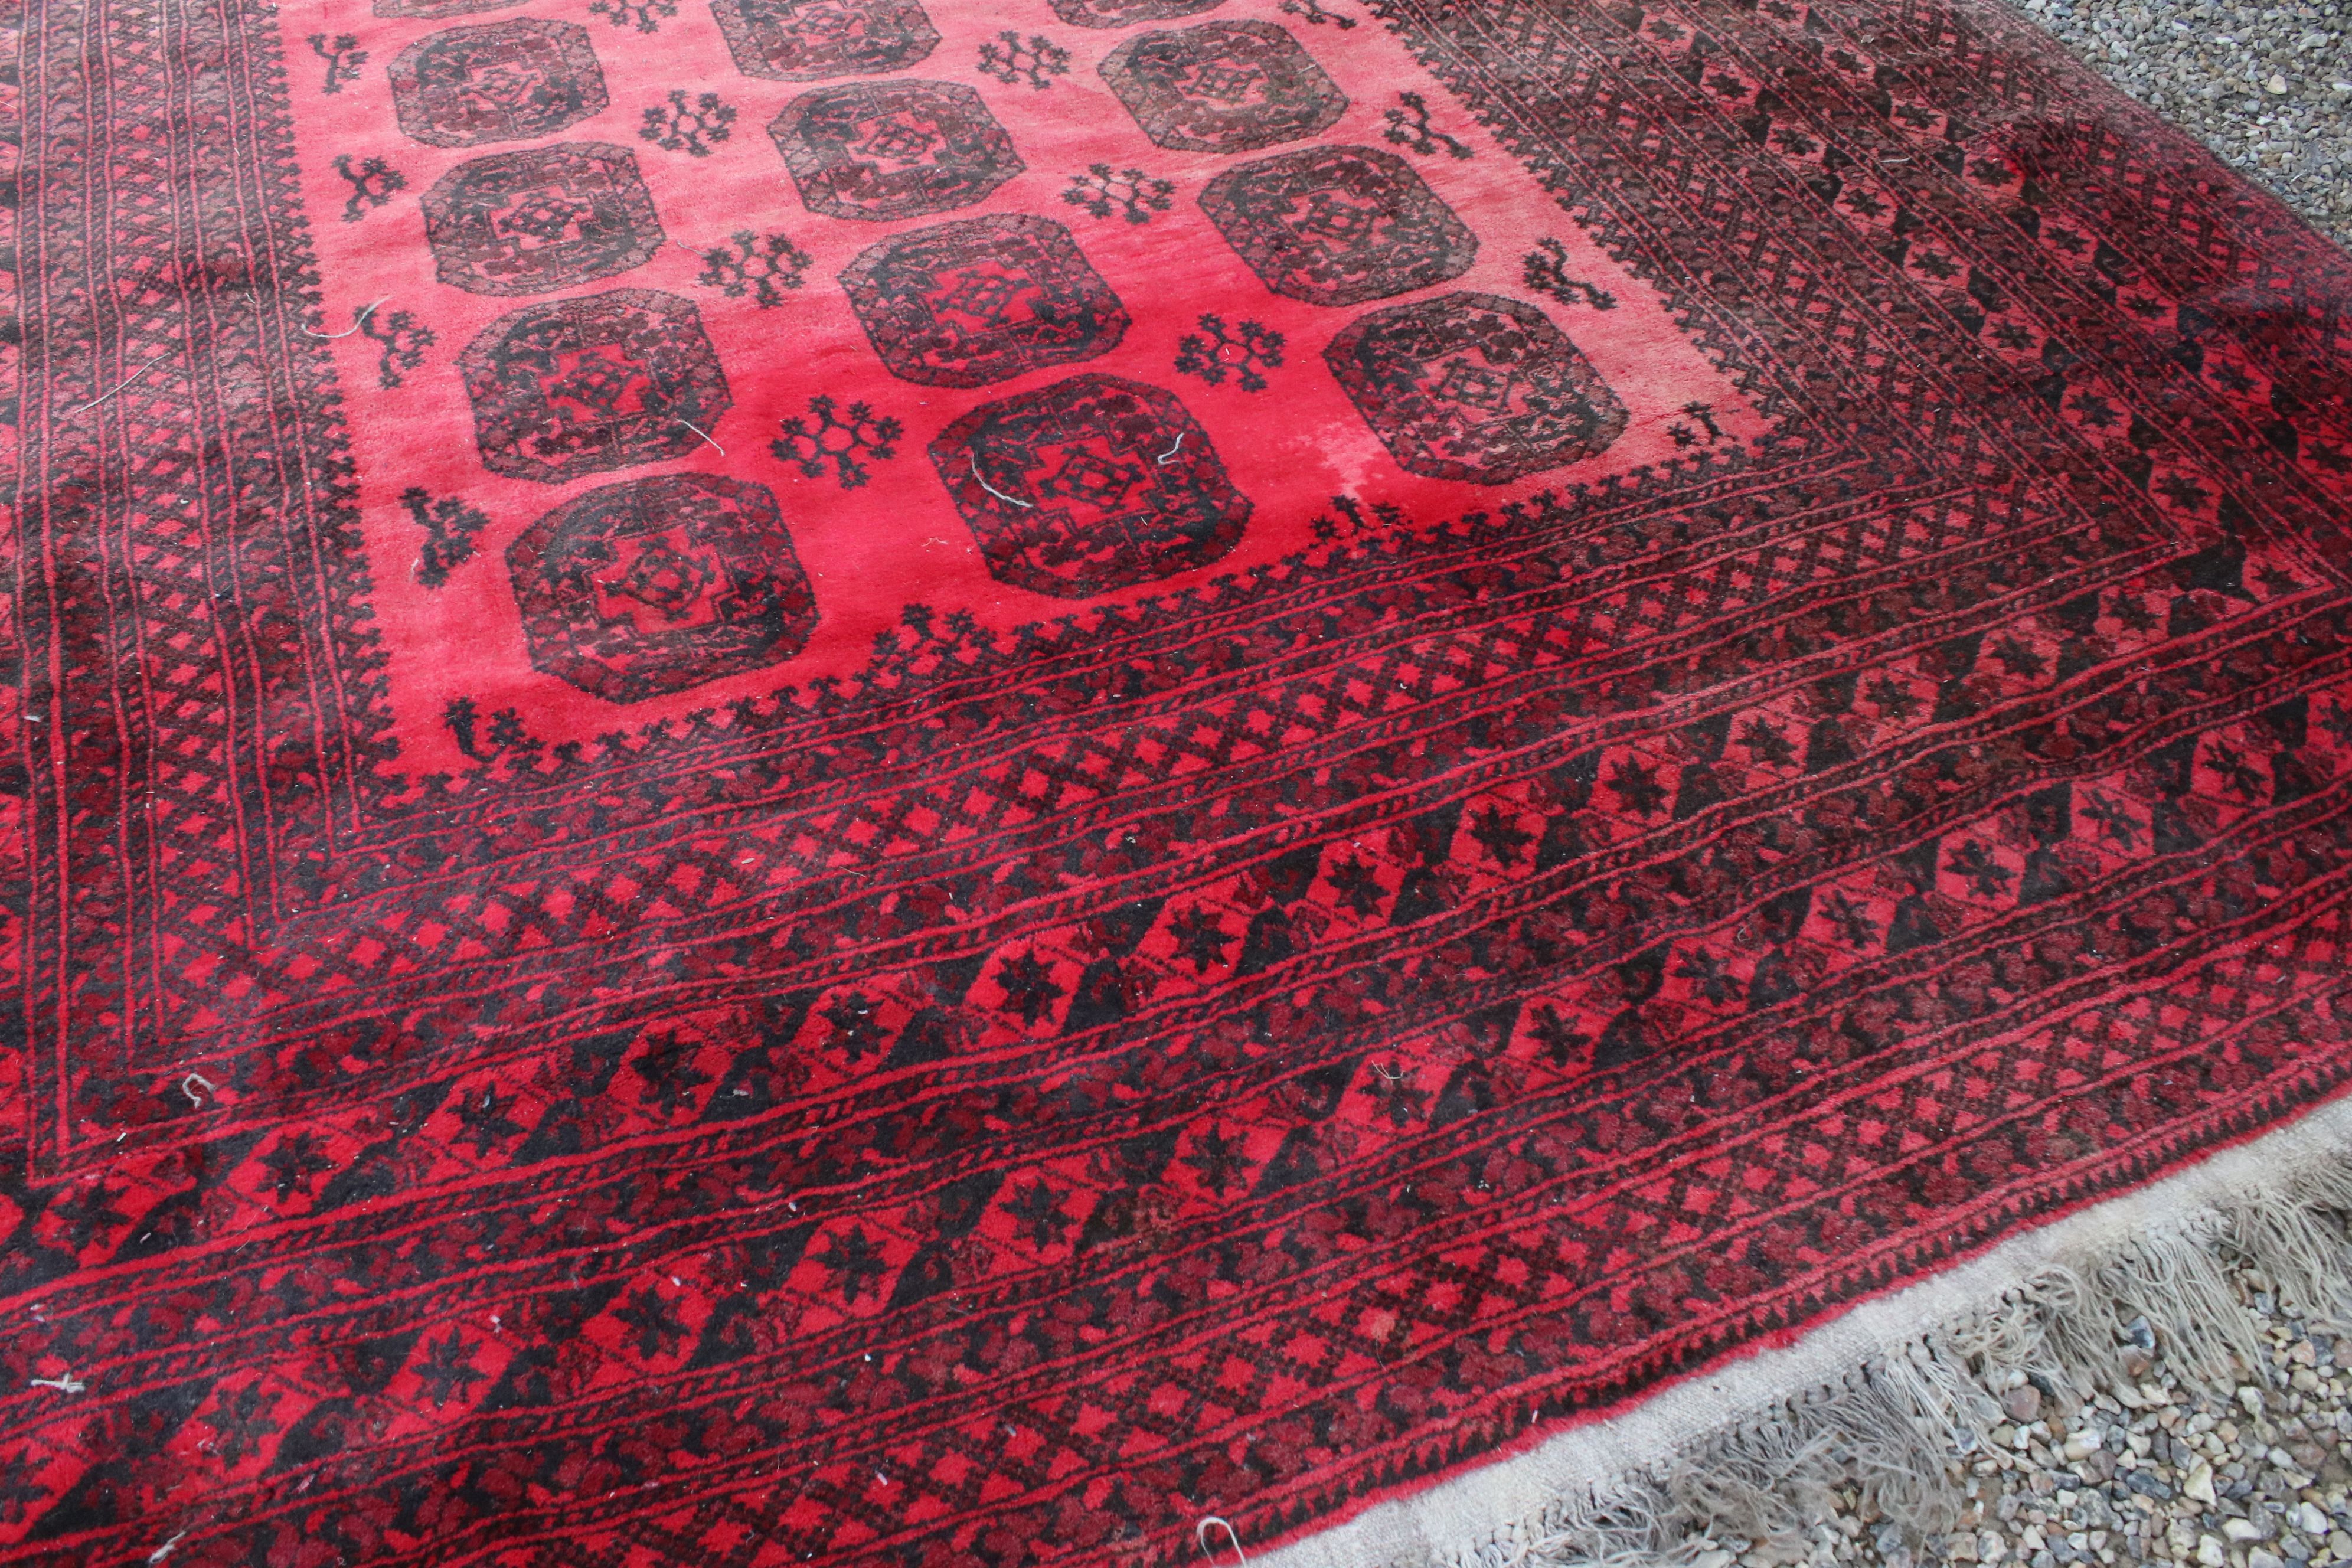 Large Wool Red Ground Rug with geometric pattern within a wide border, 417cms x 313cms - Image 7 of 10